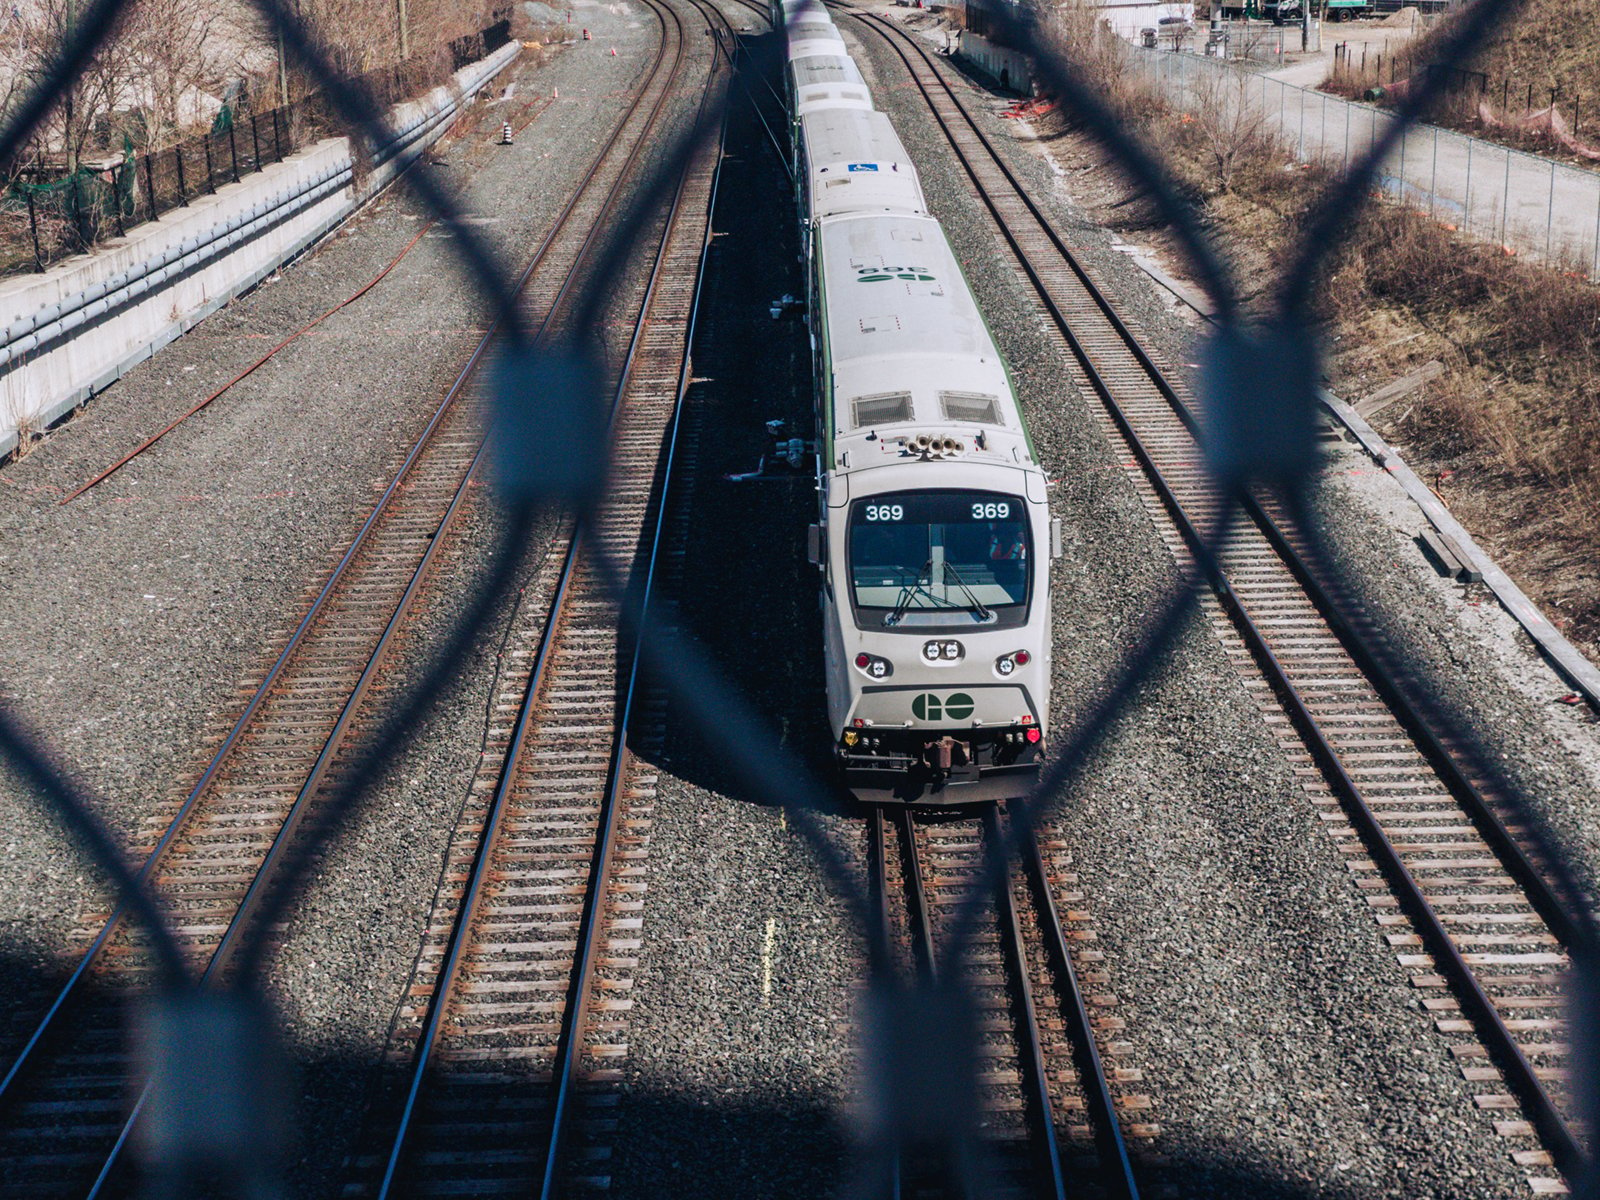 A commuter train seen through a chain-link fence, traveling on multiple tracks, captured from an overhead perspective. the train, predominantly white, moves away from the viewer.